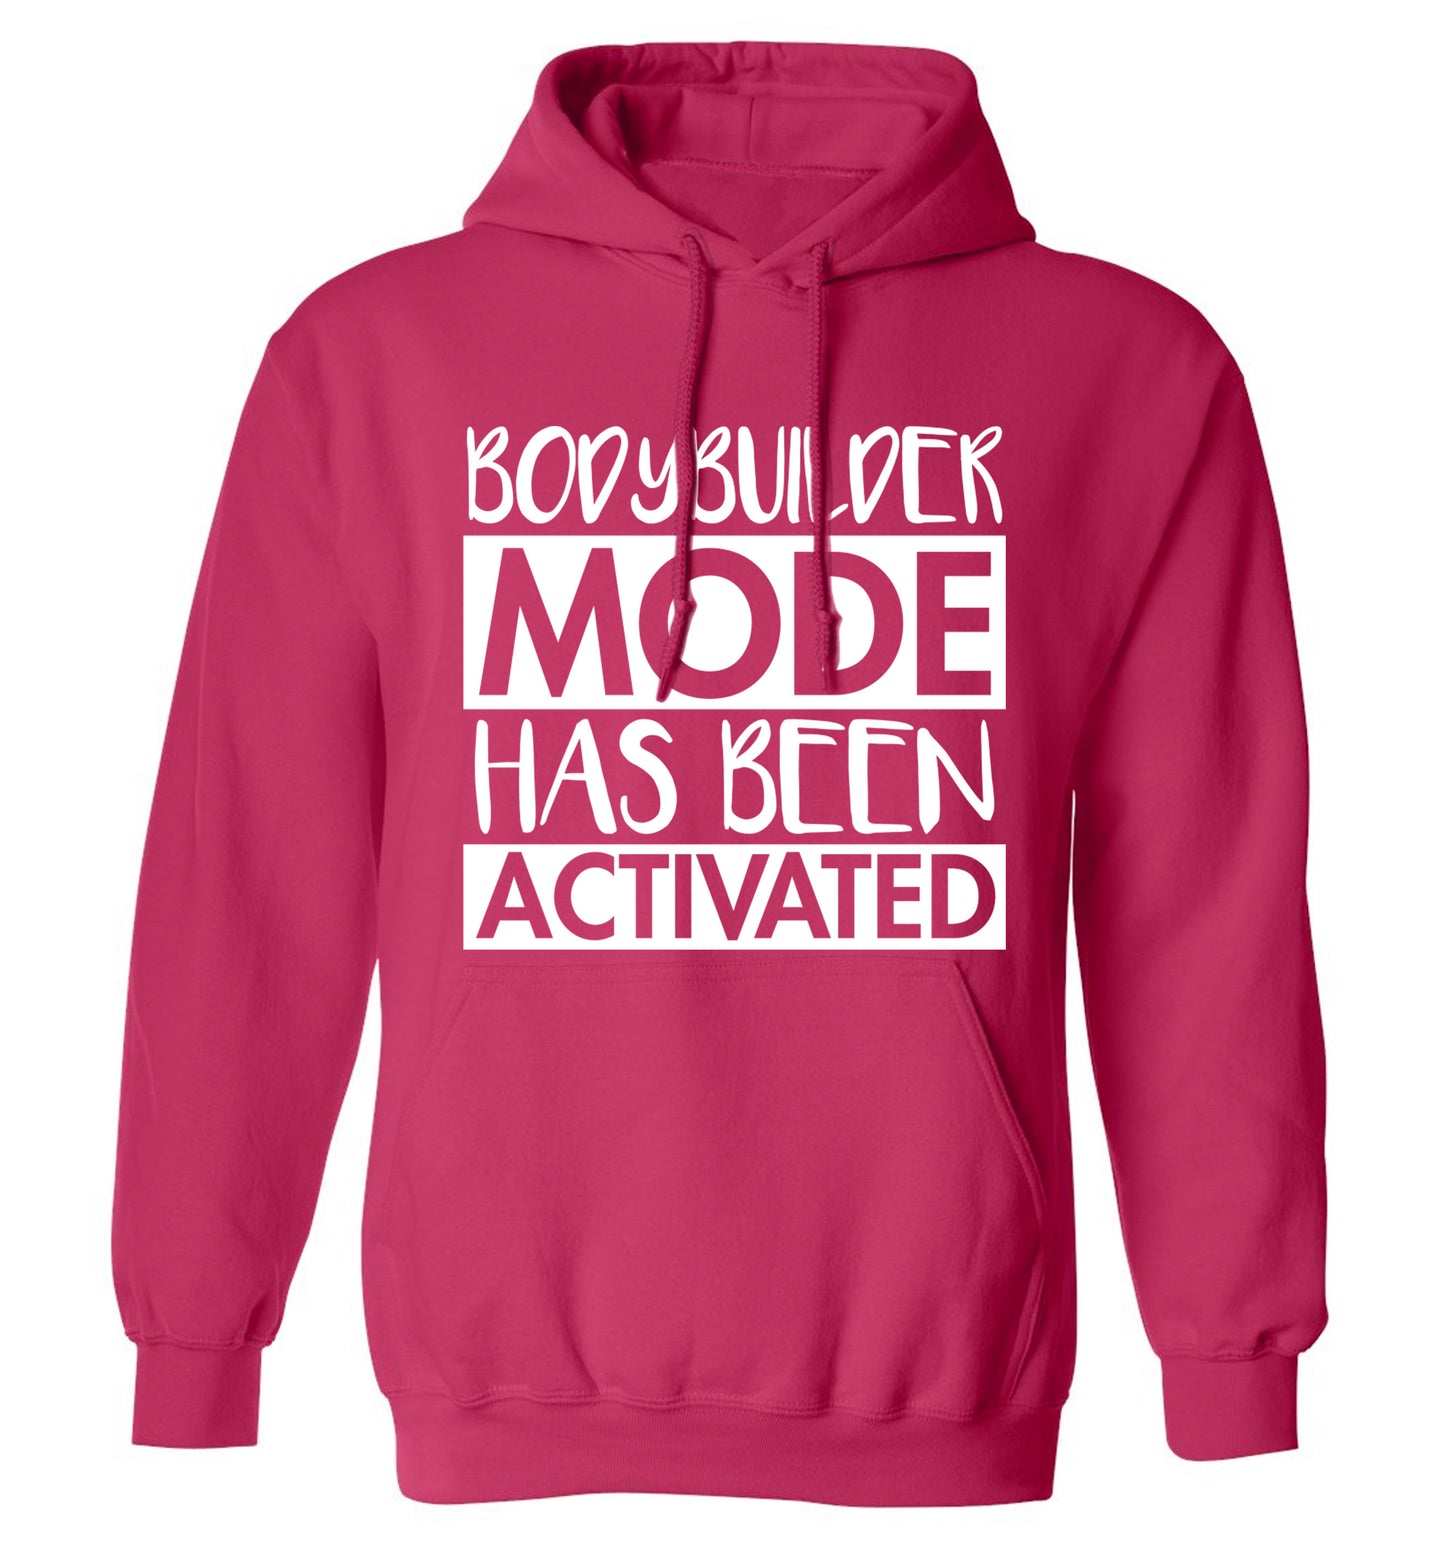 Bodybuilder mode activated adults unisex pink hoodie 2XL